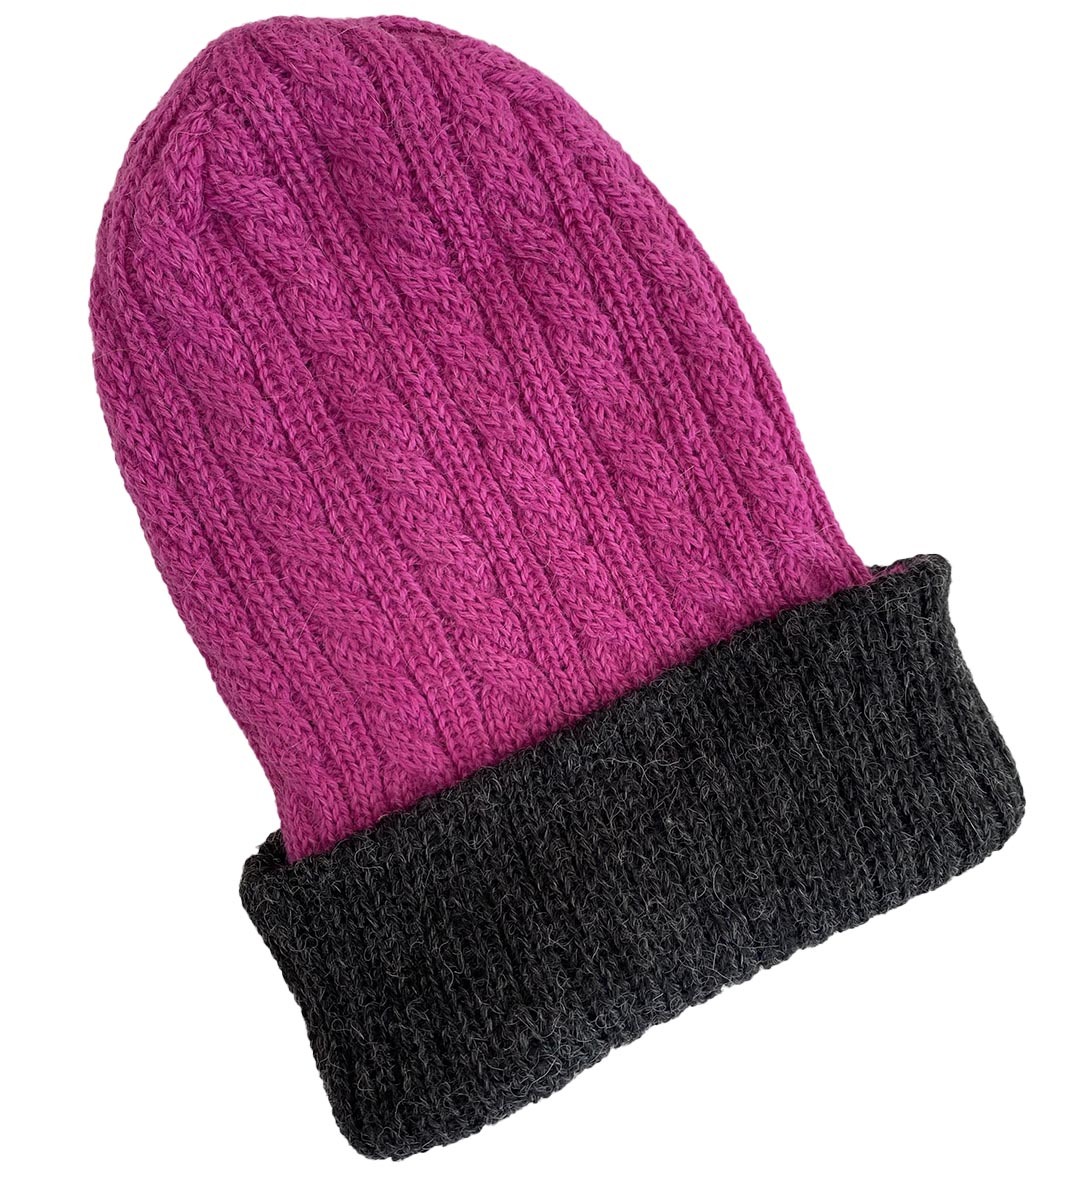 Reversible Hand Knit Alpaca Beanie Hot - Pink/Charcoal - 1